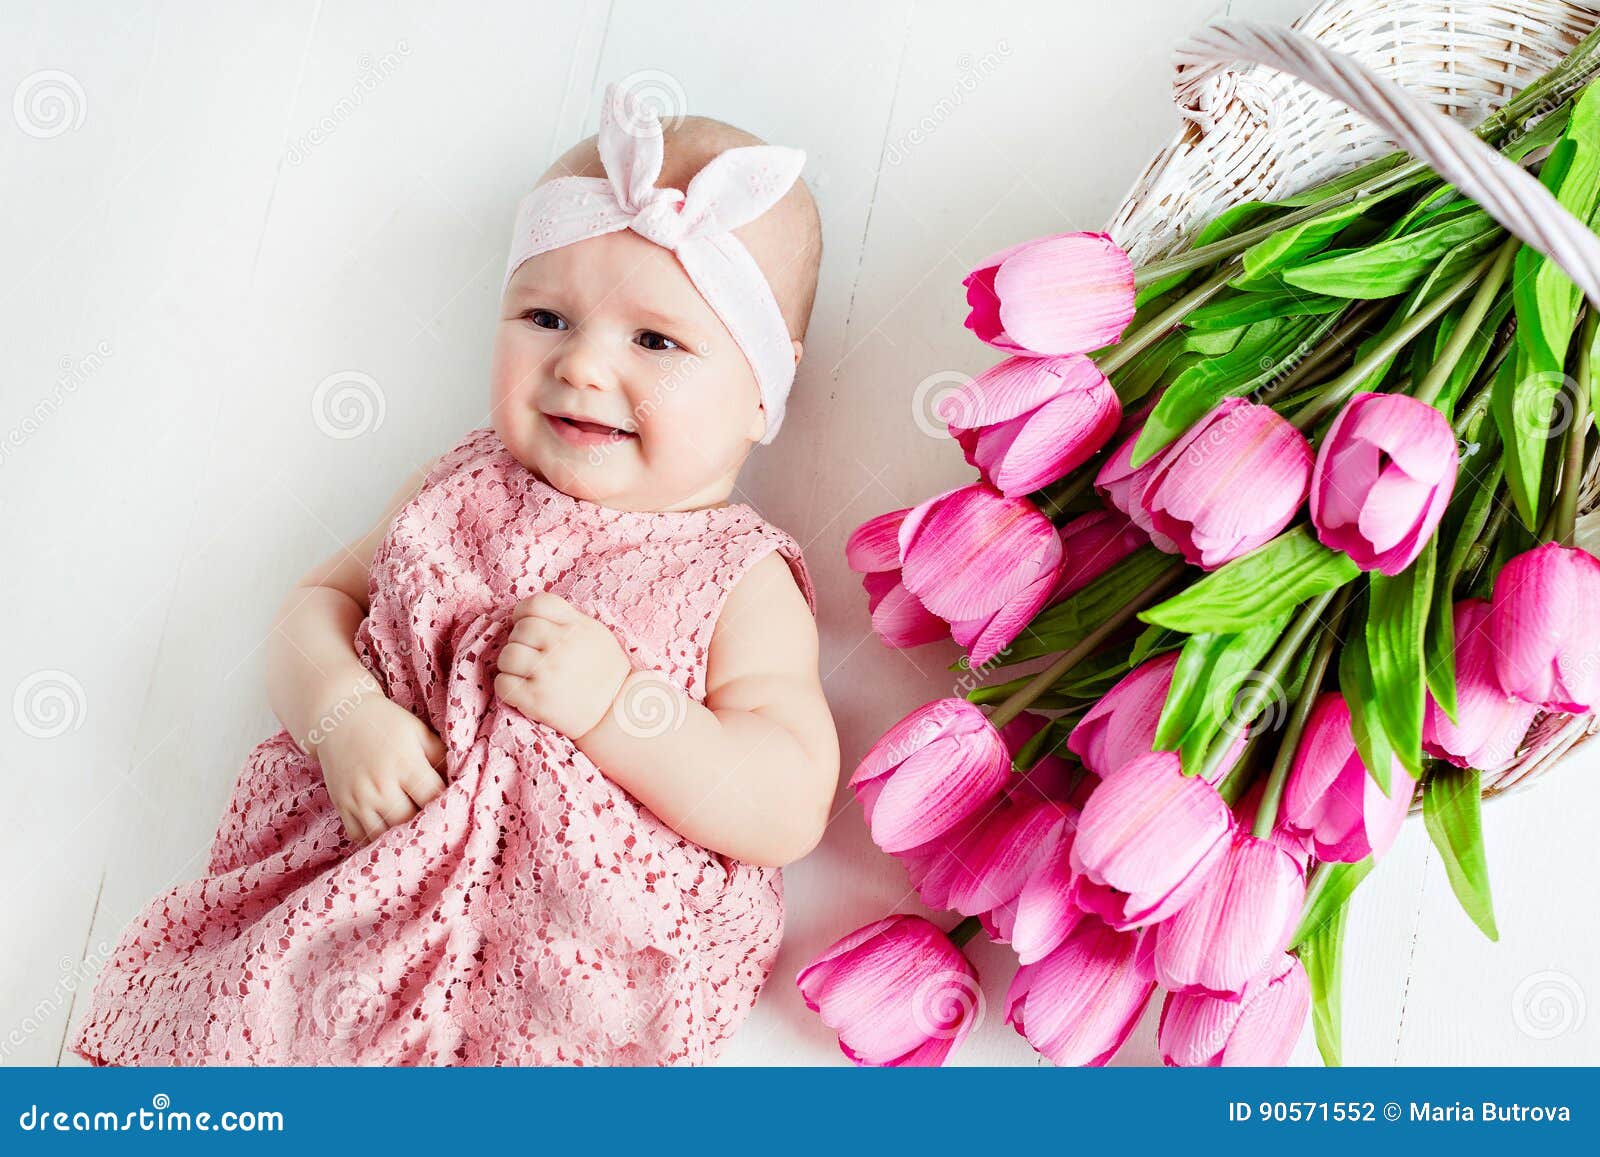 Small Very Cute, Big-eyed Little Baby Girl in a Pink Dress Lying ...